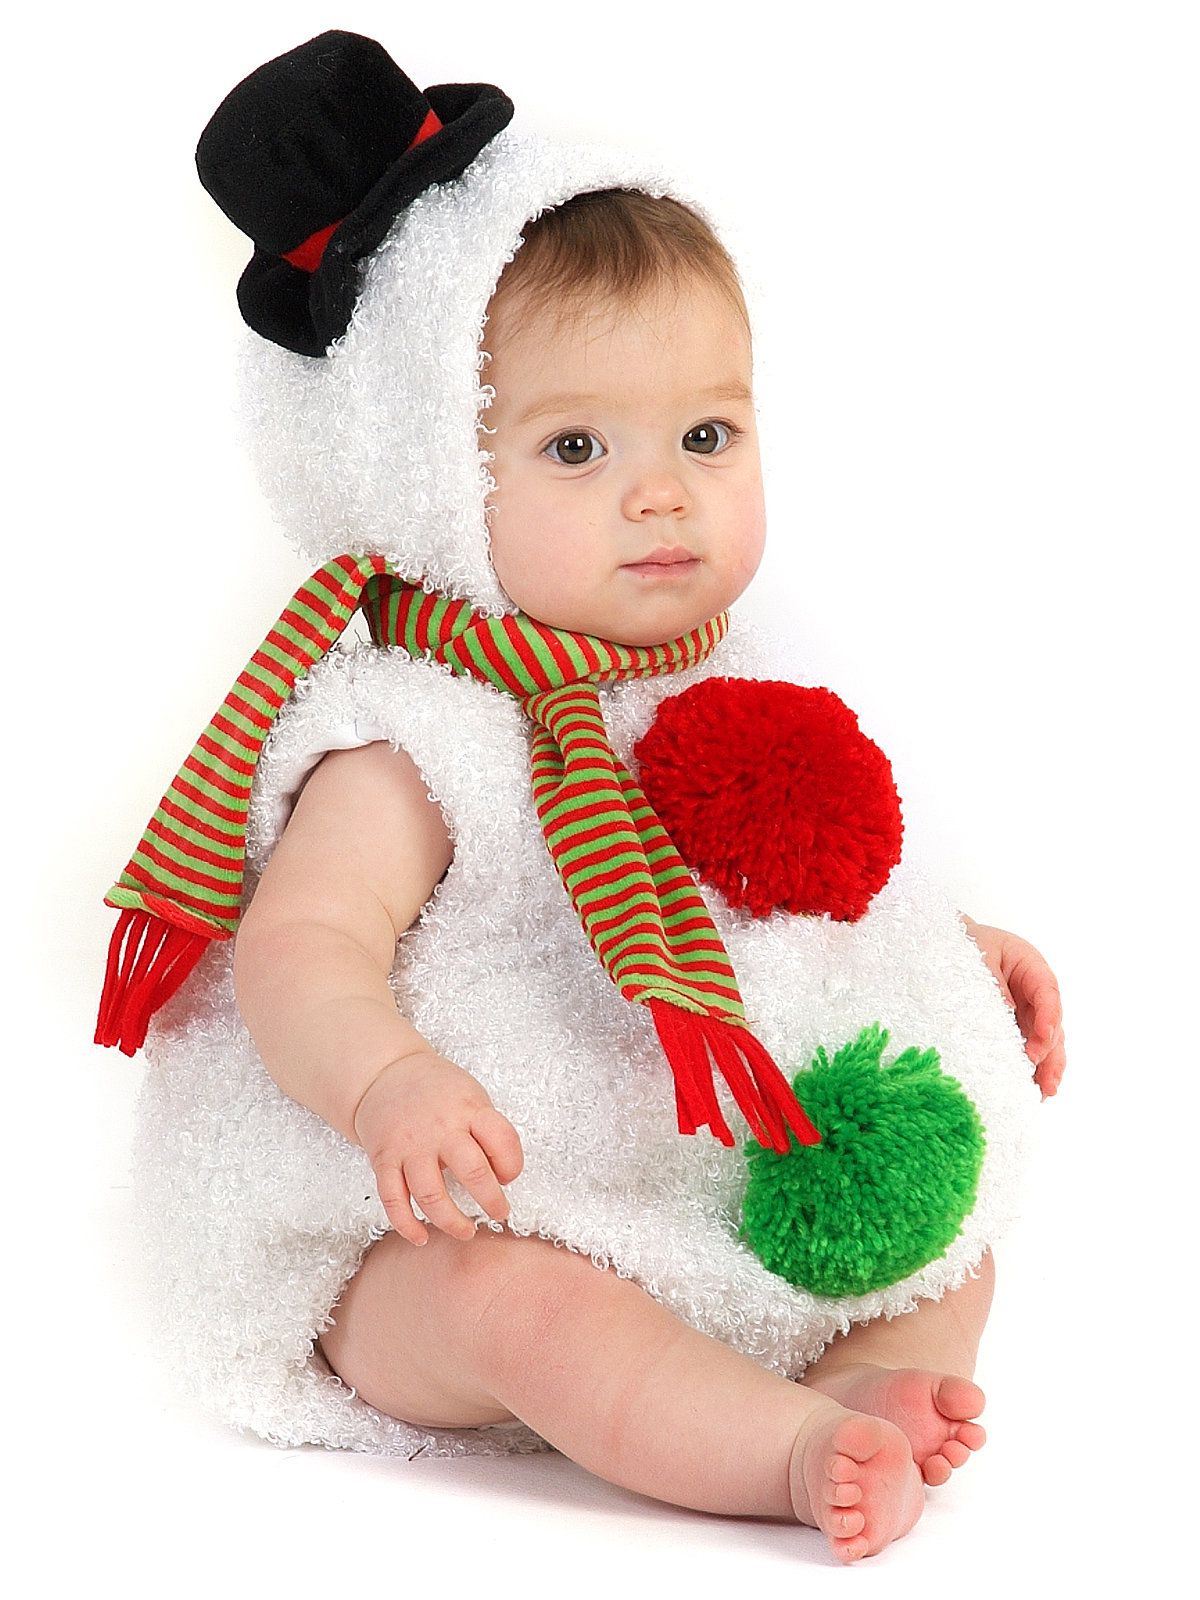 Baby/Toddler Baby Snowman Costume - costumes.com